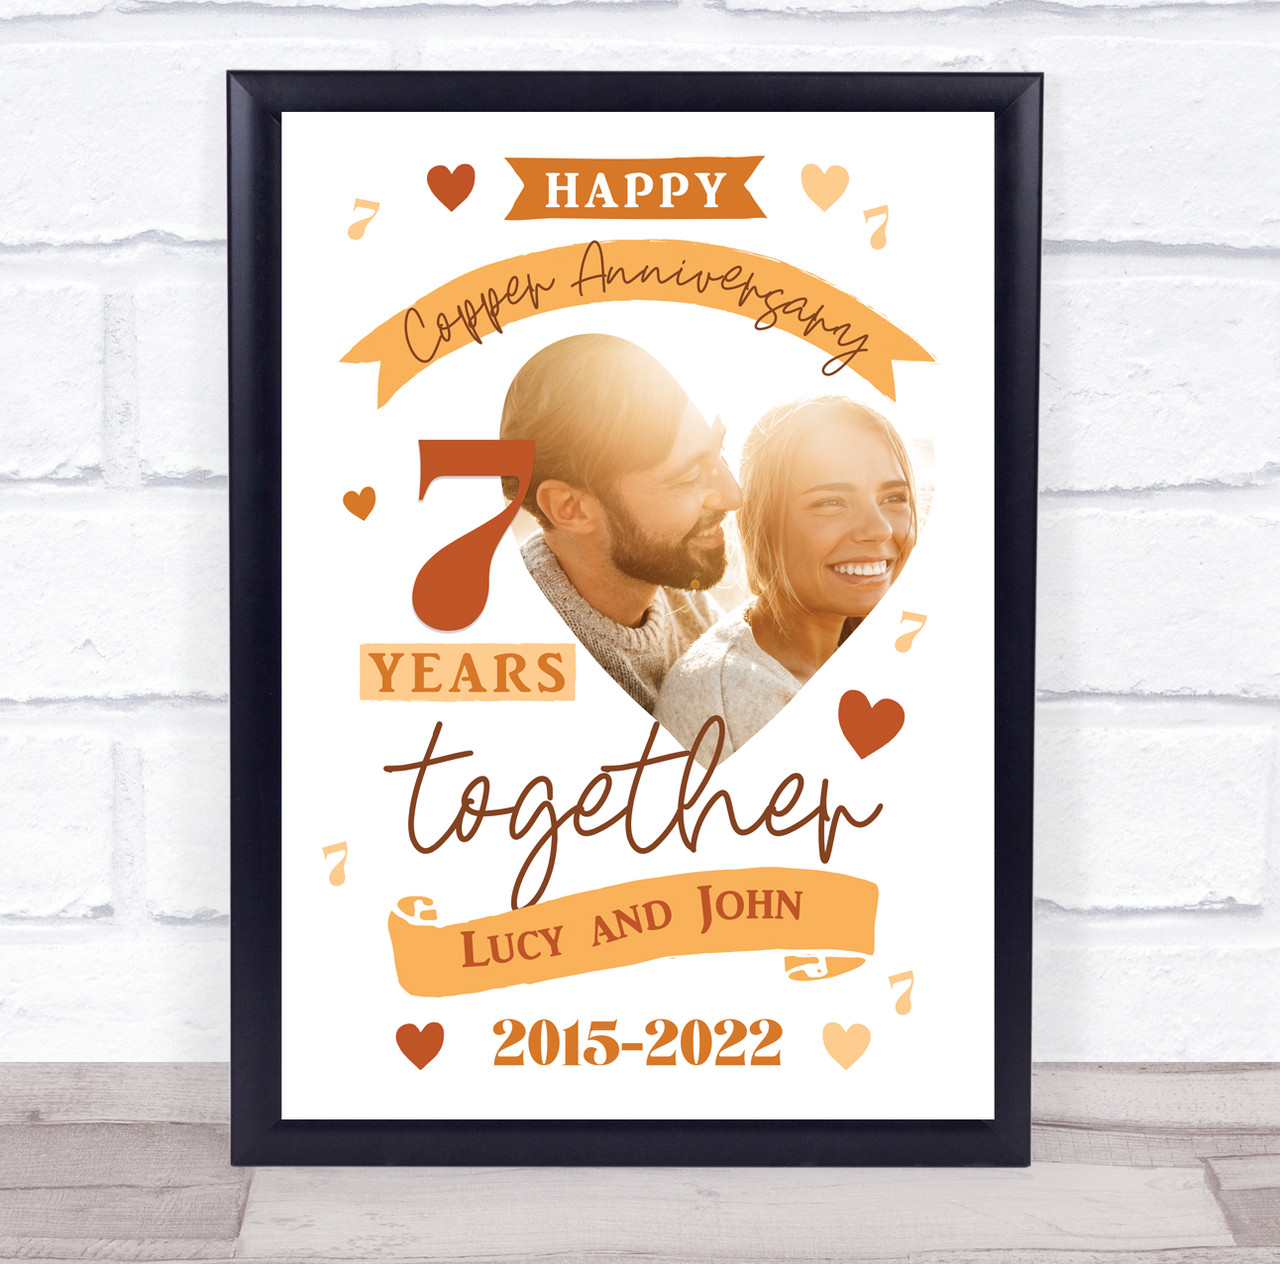 Years Together 8th Wedding Anniversary Bronze Photo Gift, 56% OFF